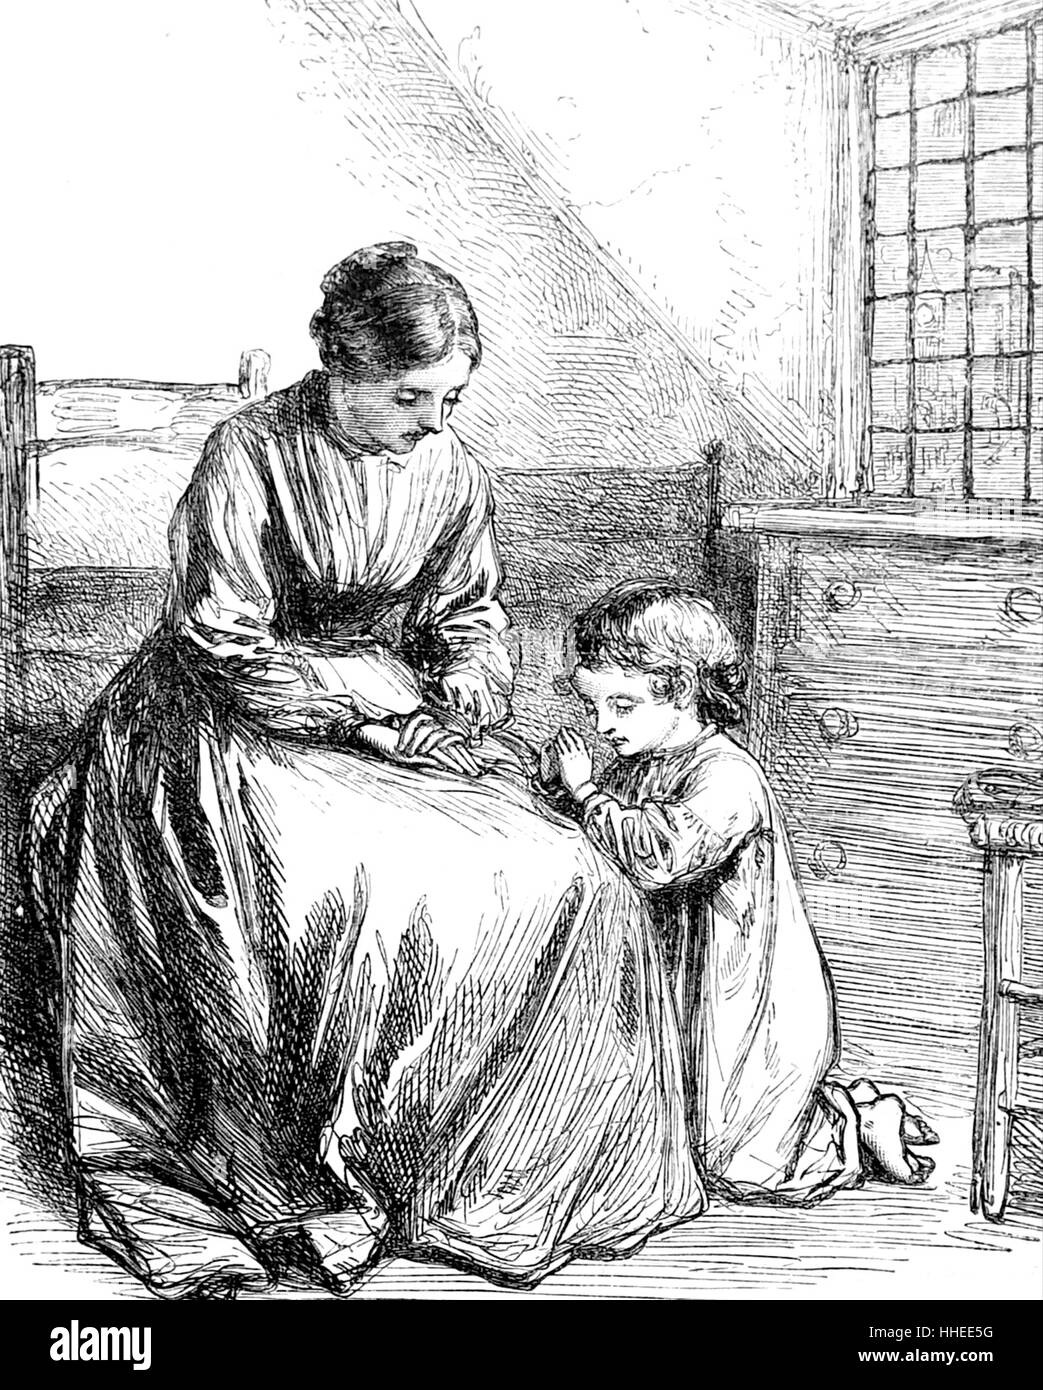 Engraving depicting a mother teaching her young daughter how to pray. Dated 19th Century Stock Photo